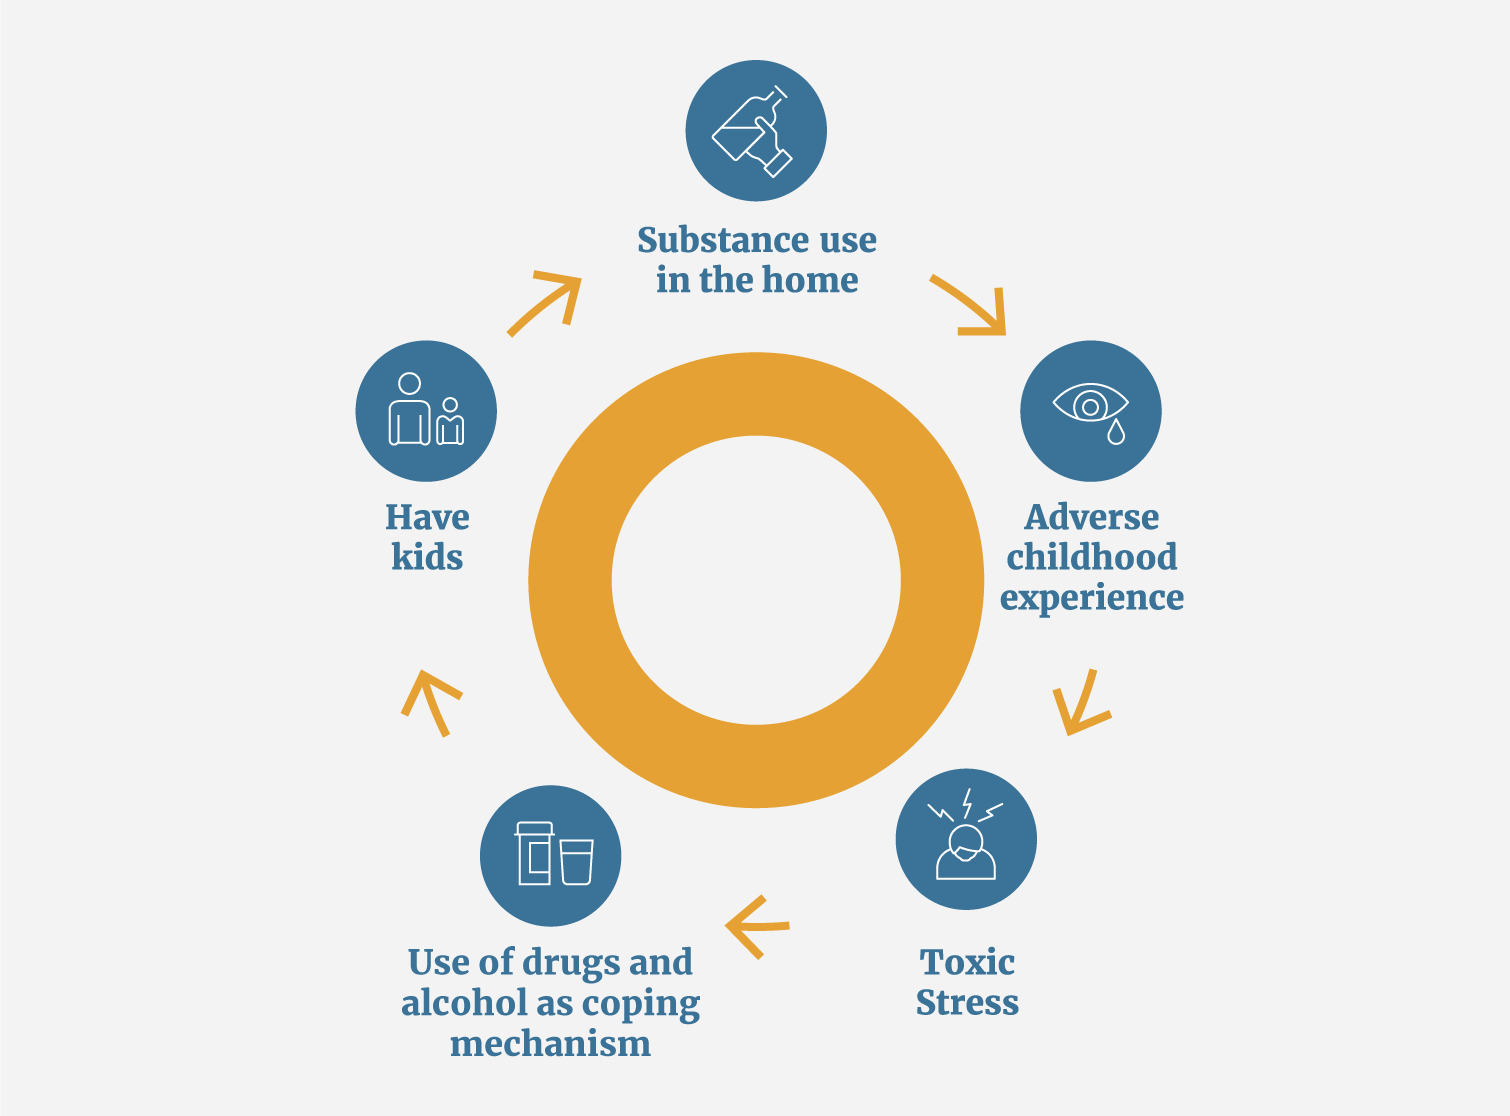 Circle of adversity: adverse childhood experience, toxic stress, use of drugs and alcohol as coping mechanism, have kids, substance use in the home